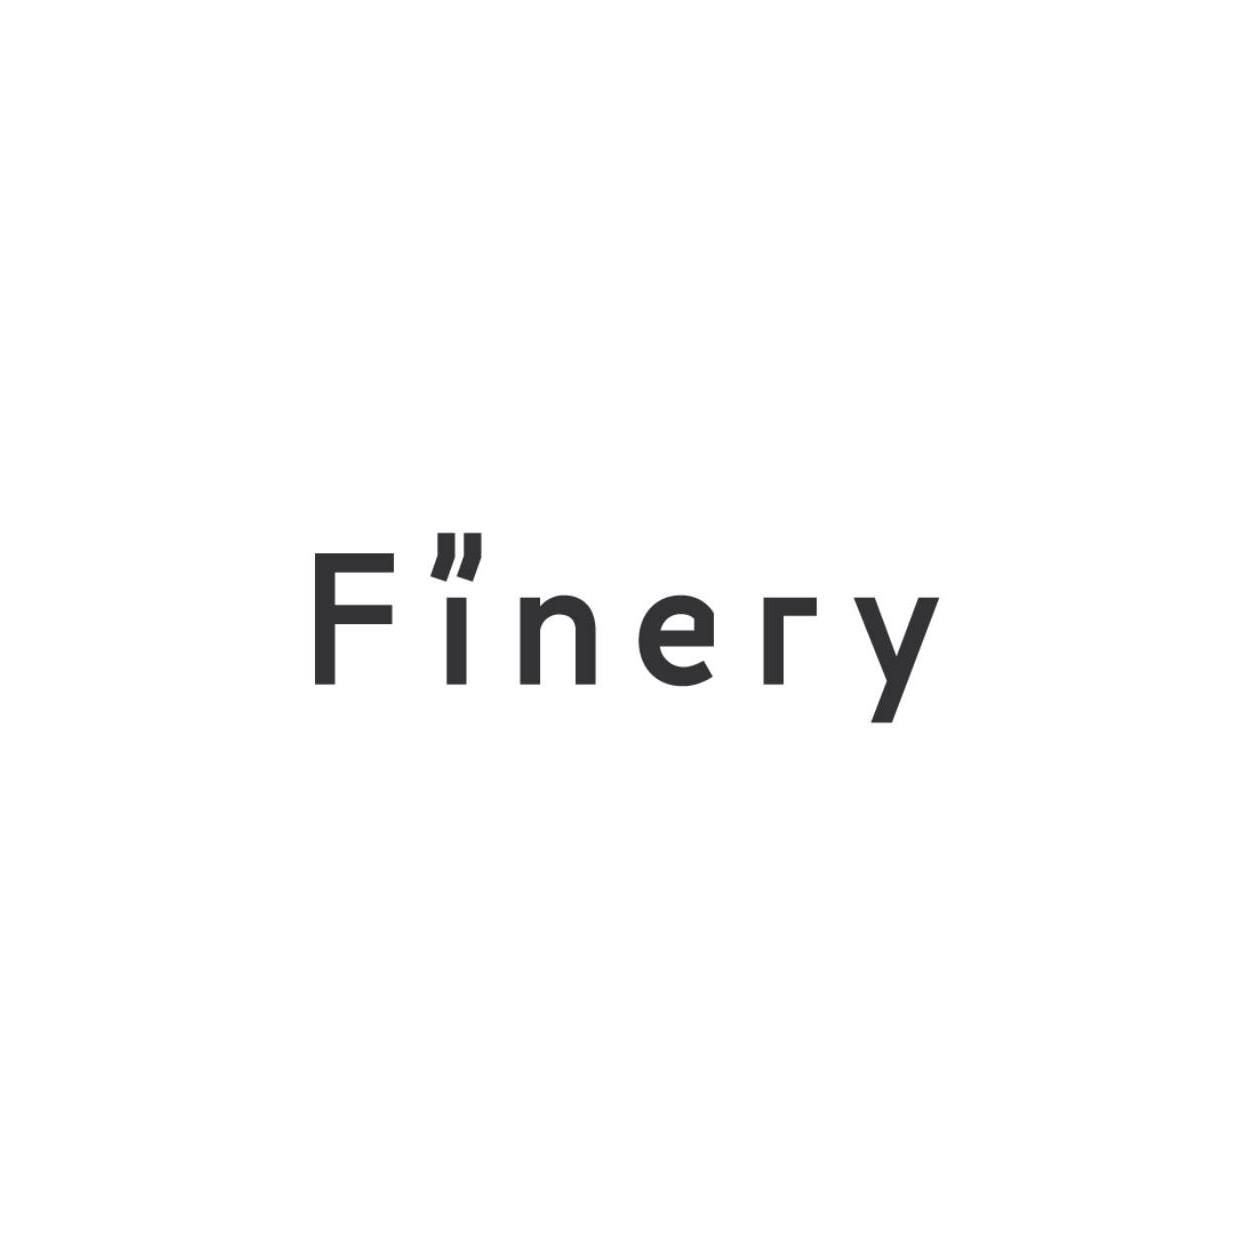 Finery London Coupons & Promo Codes